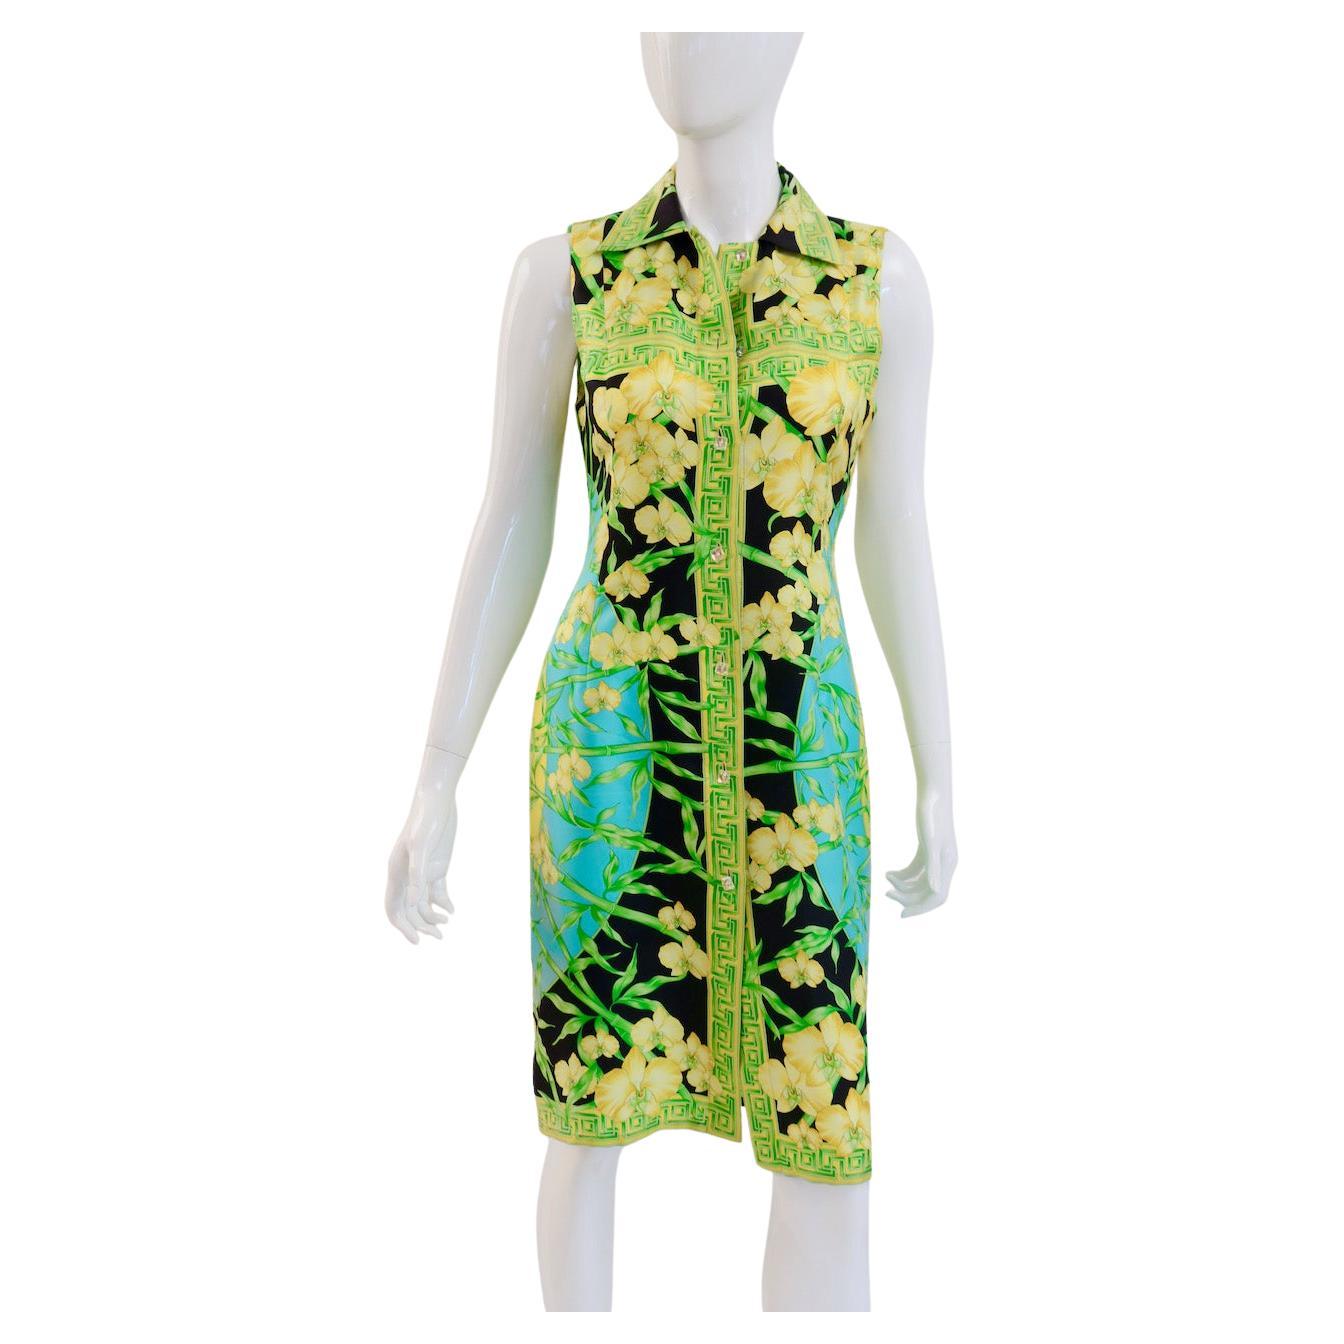 S/S 2000 Vintage VERSACE Couture Dress For Sale